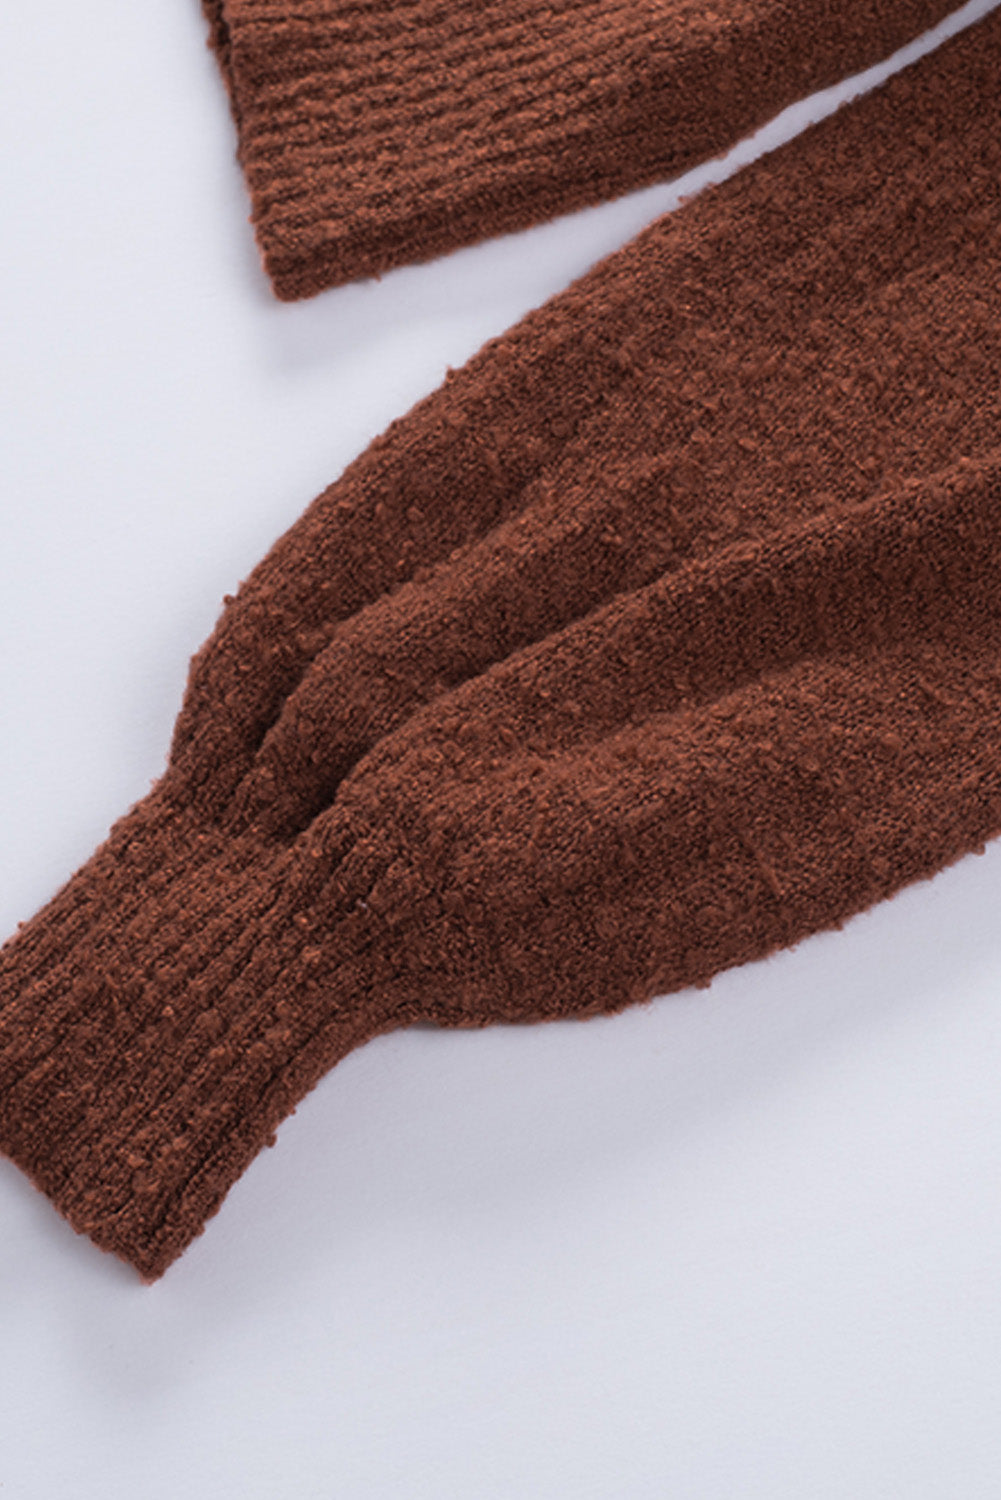 Brown Solid Color Lantern Sleeve Knitted Sweater